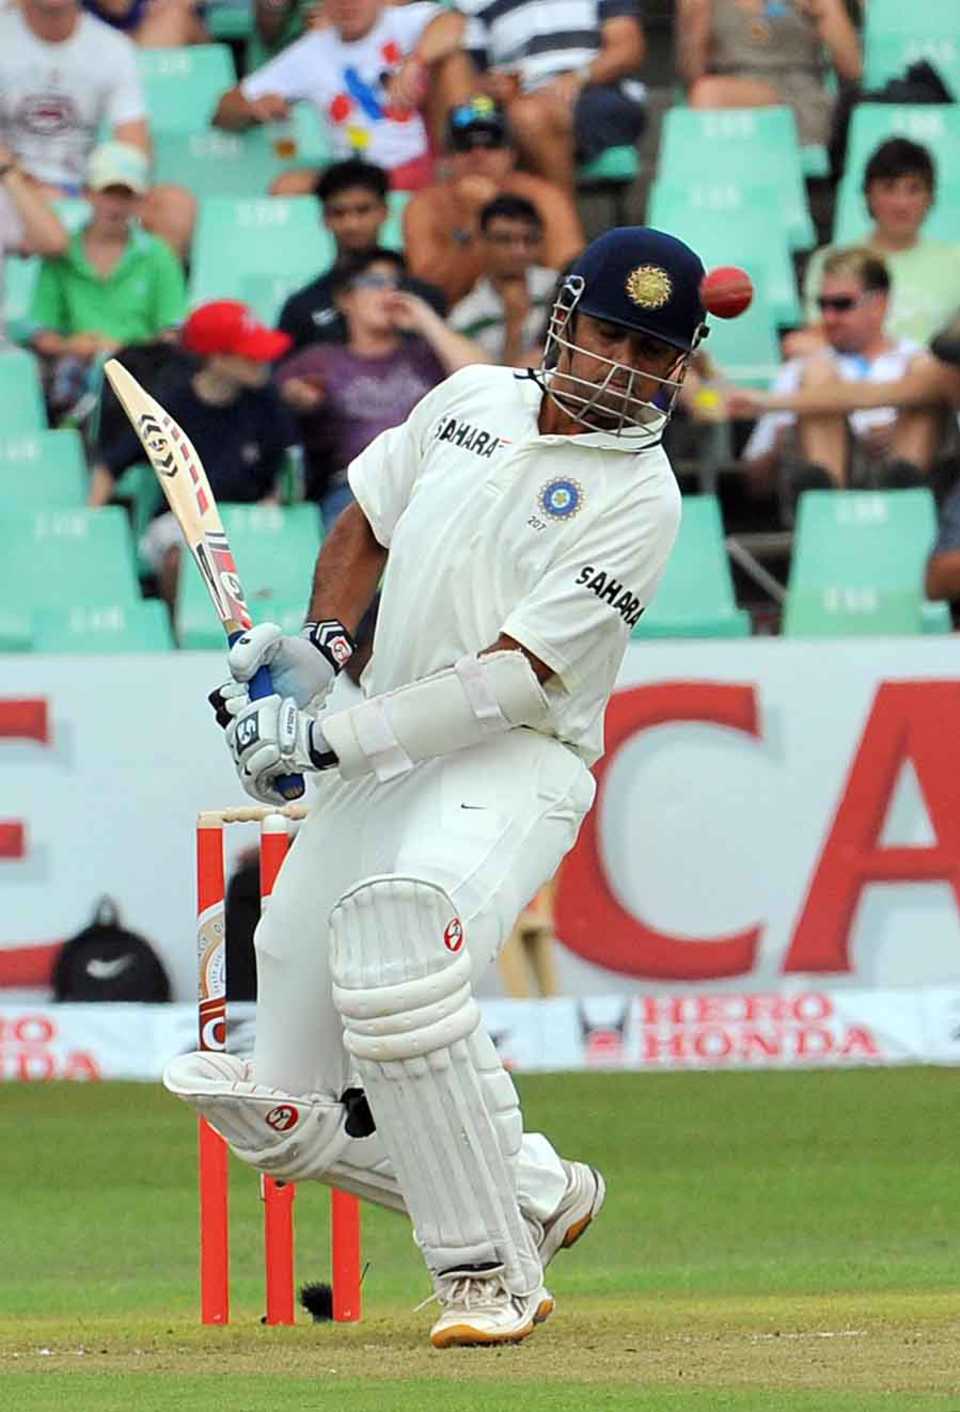 Rahul Dravid sways away from a bouncer, South Africa v India, 2nd Test, Durban, 1st day, December 26, 2010